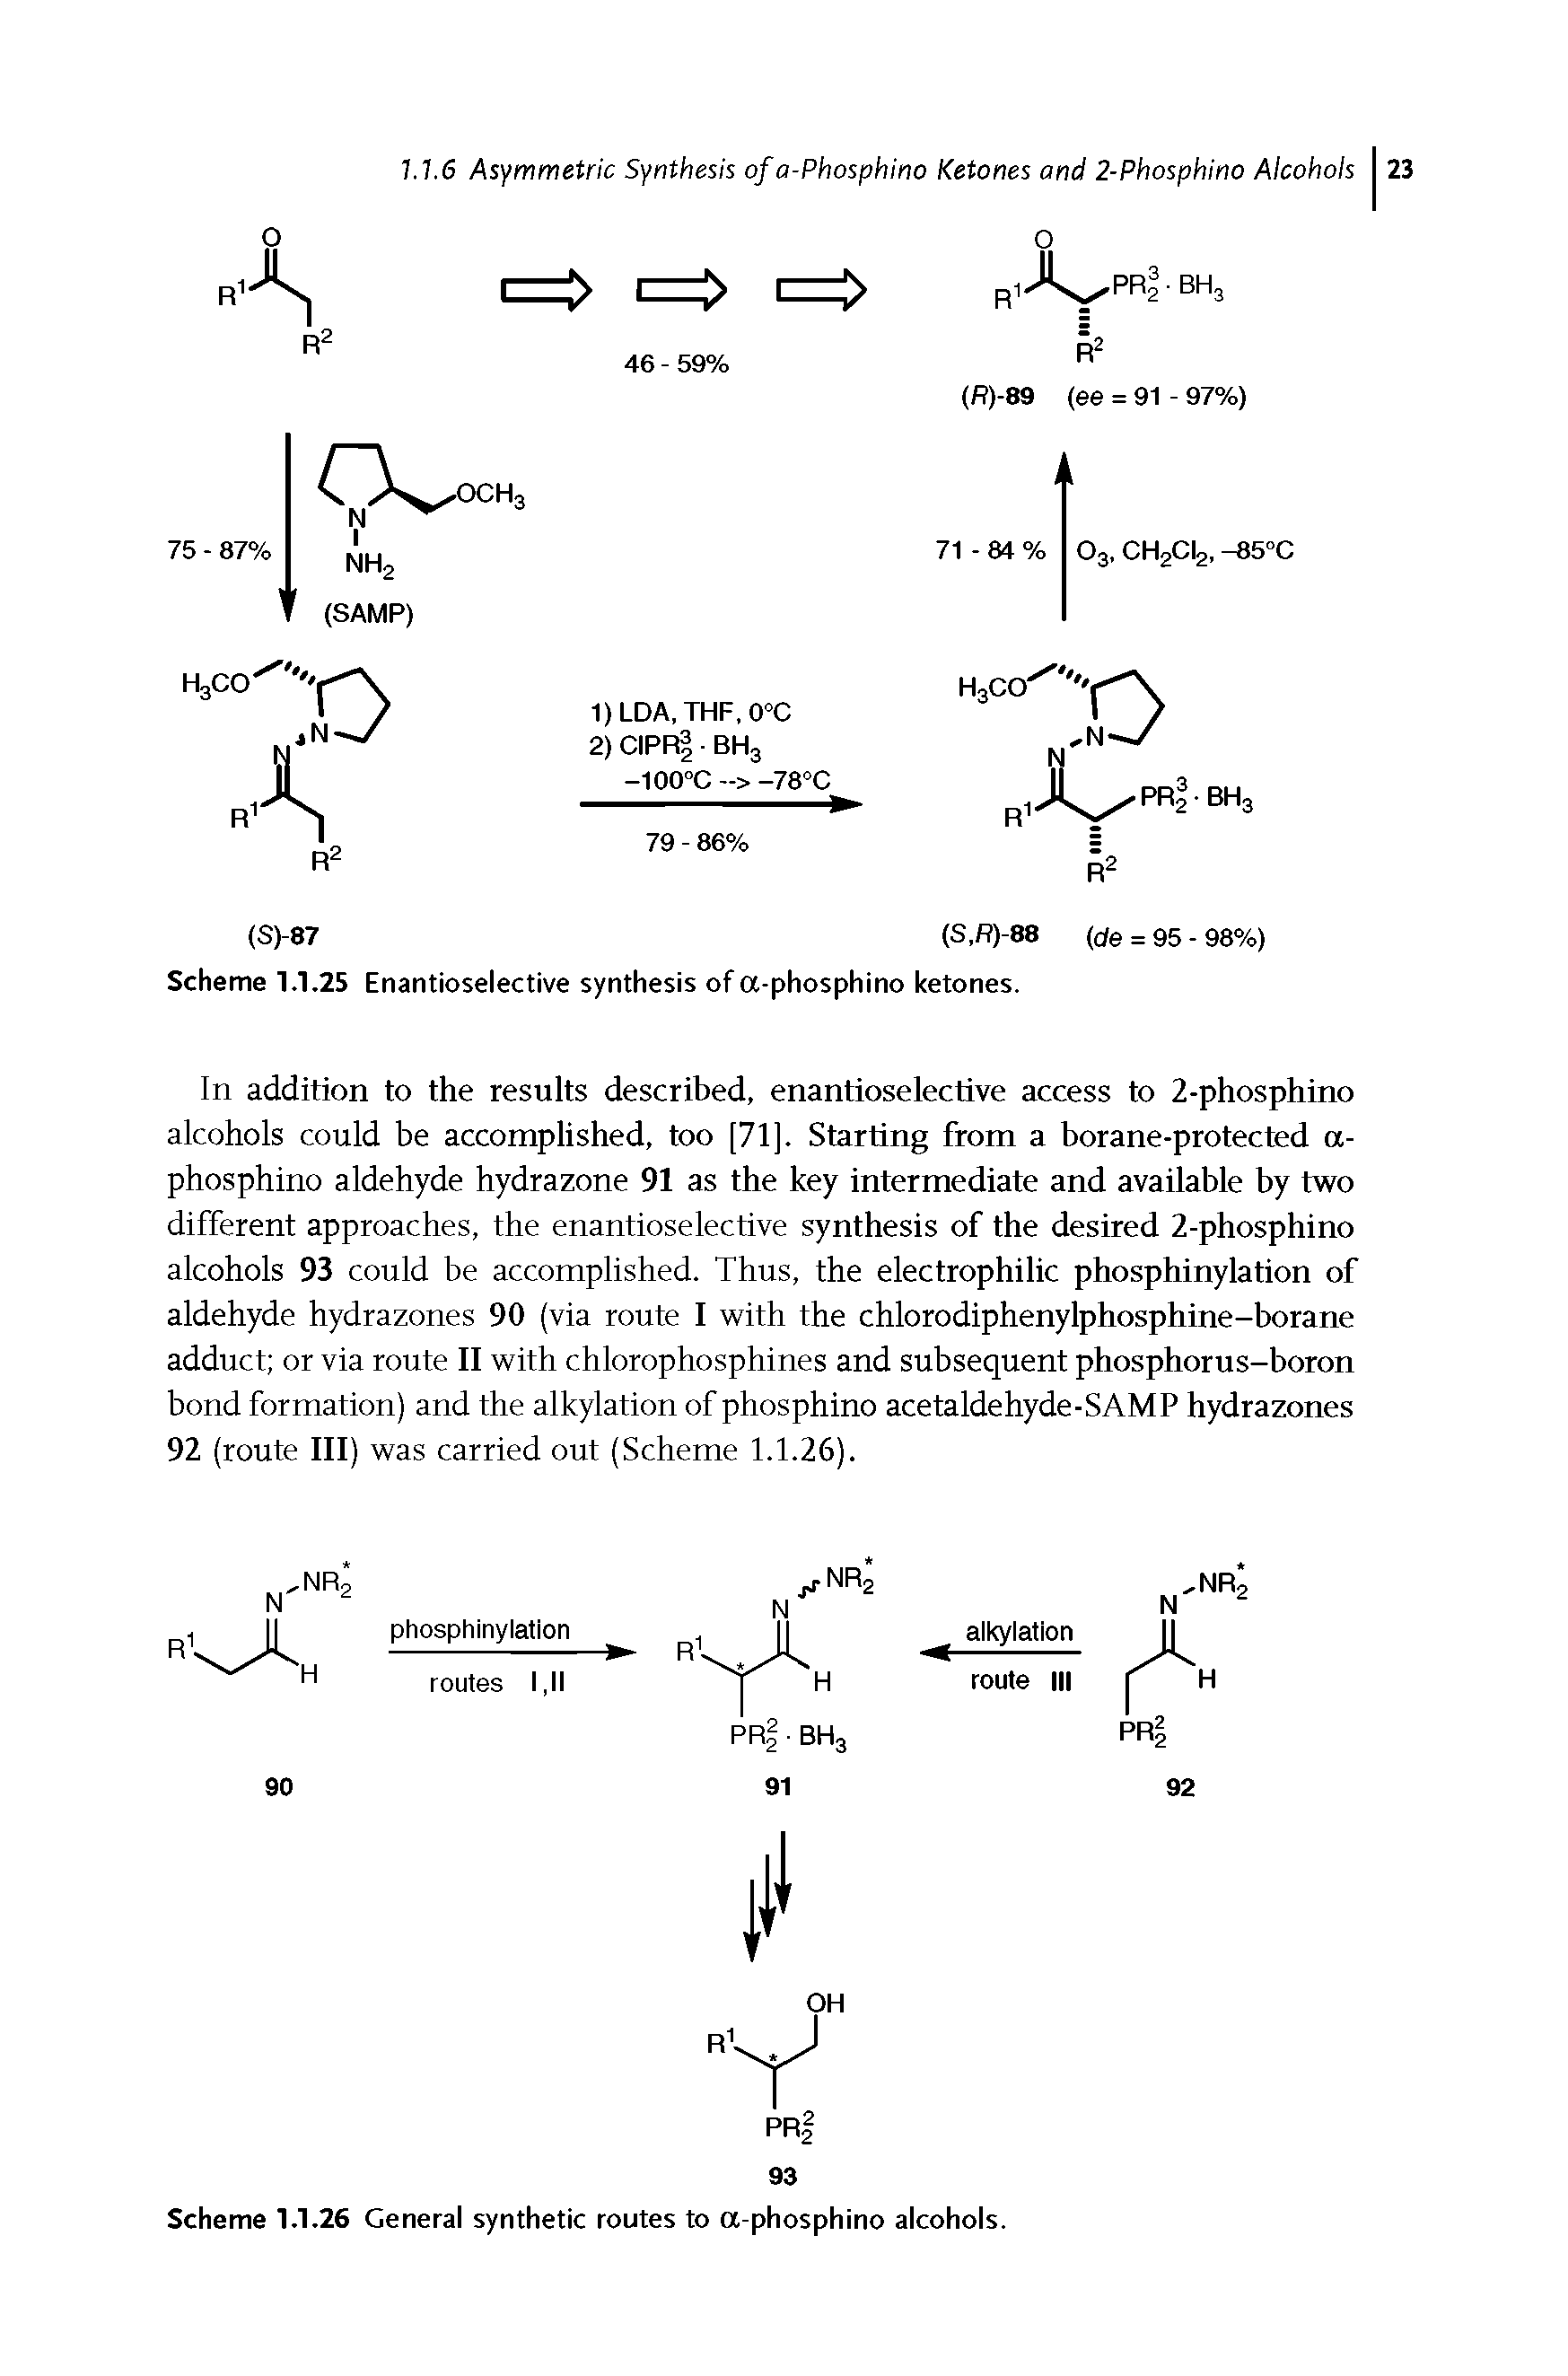 Scheme 1.1.26 General synthetic routes to a-phosphino alcohols.